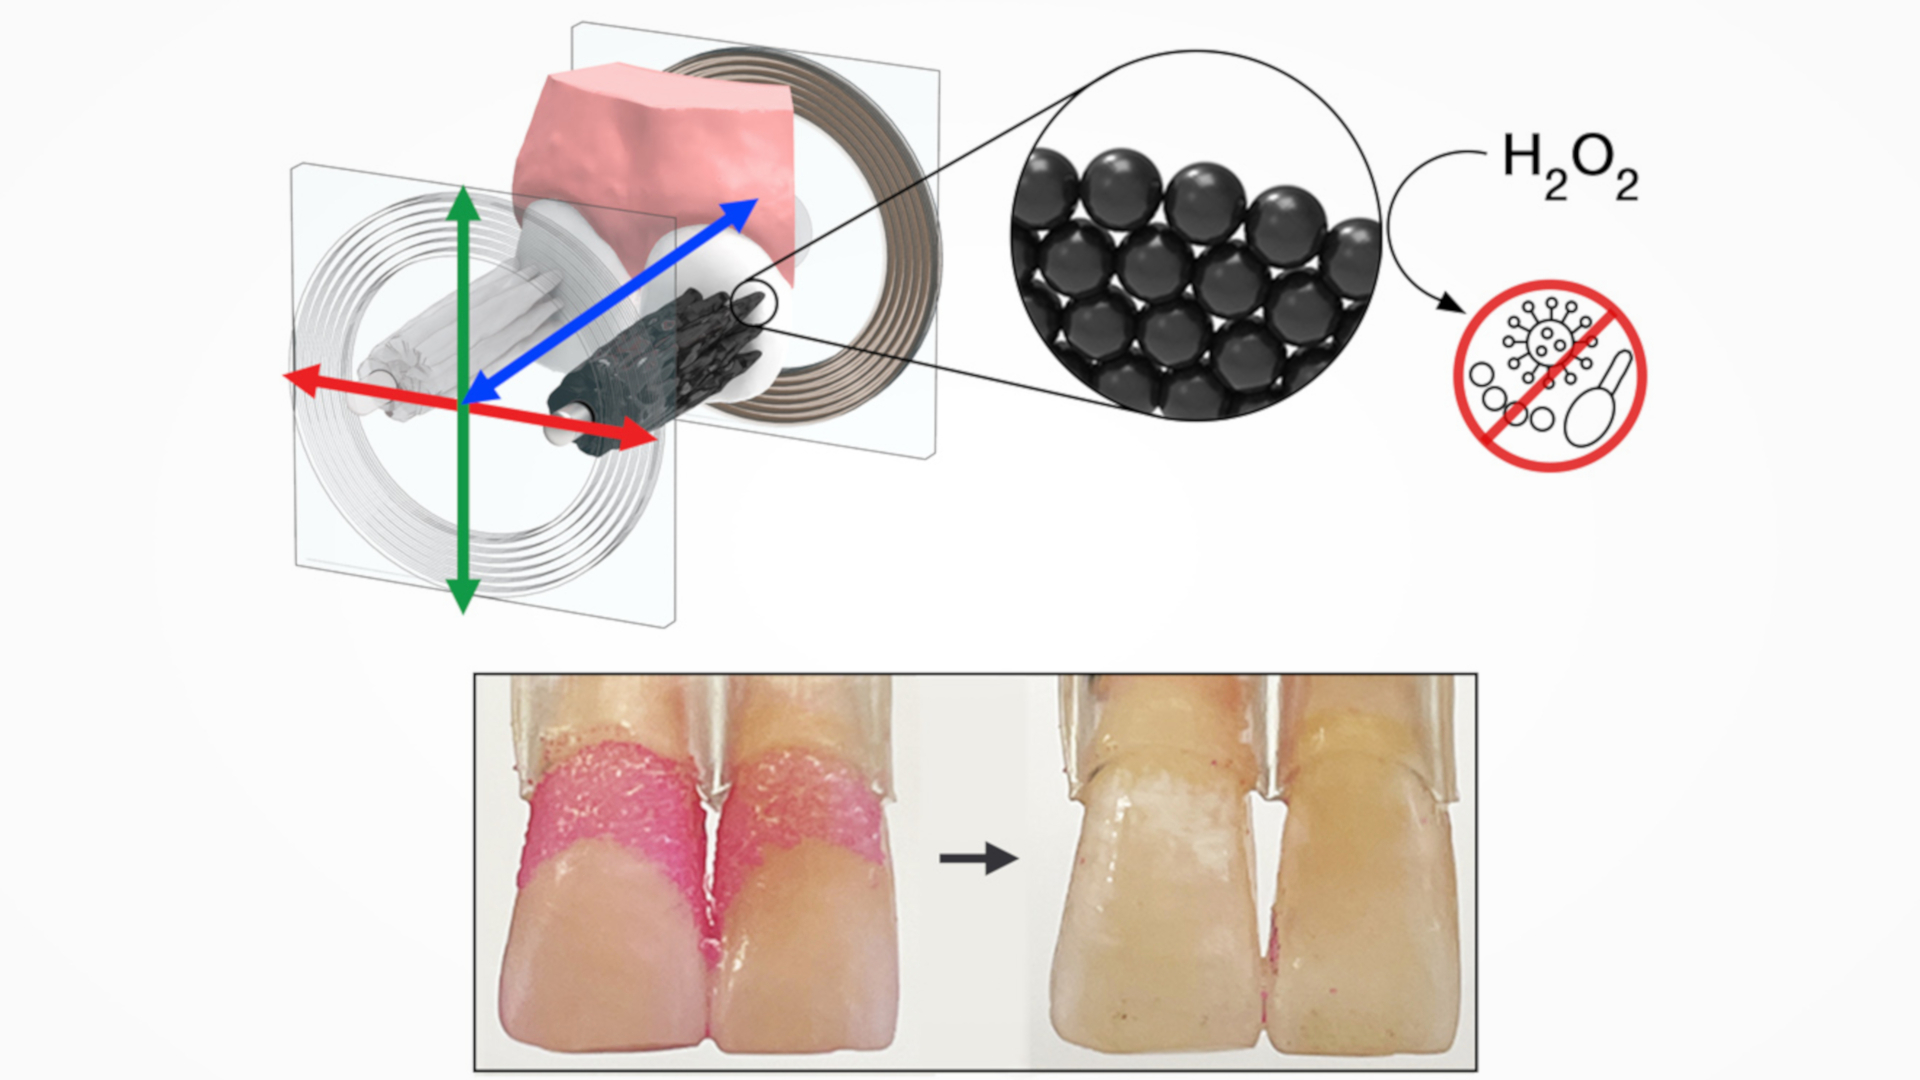 By forming hydroxyl radicals in the presence of hydrogen peroxide (H2O2), the nanoparticles, which also have magnetic properties, can effectively eliminate dental plaque. (Image: Min Jun Oh/Penn Dental Medicine)